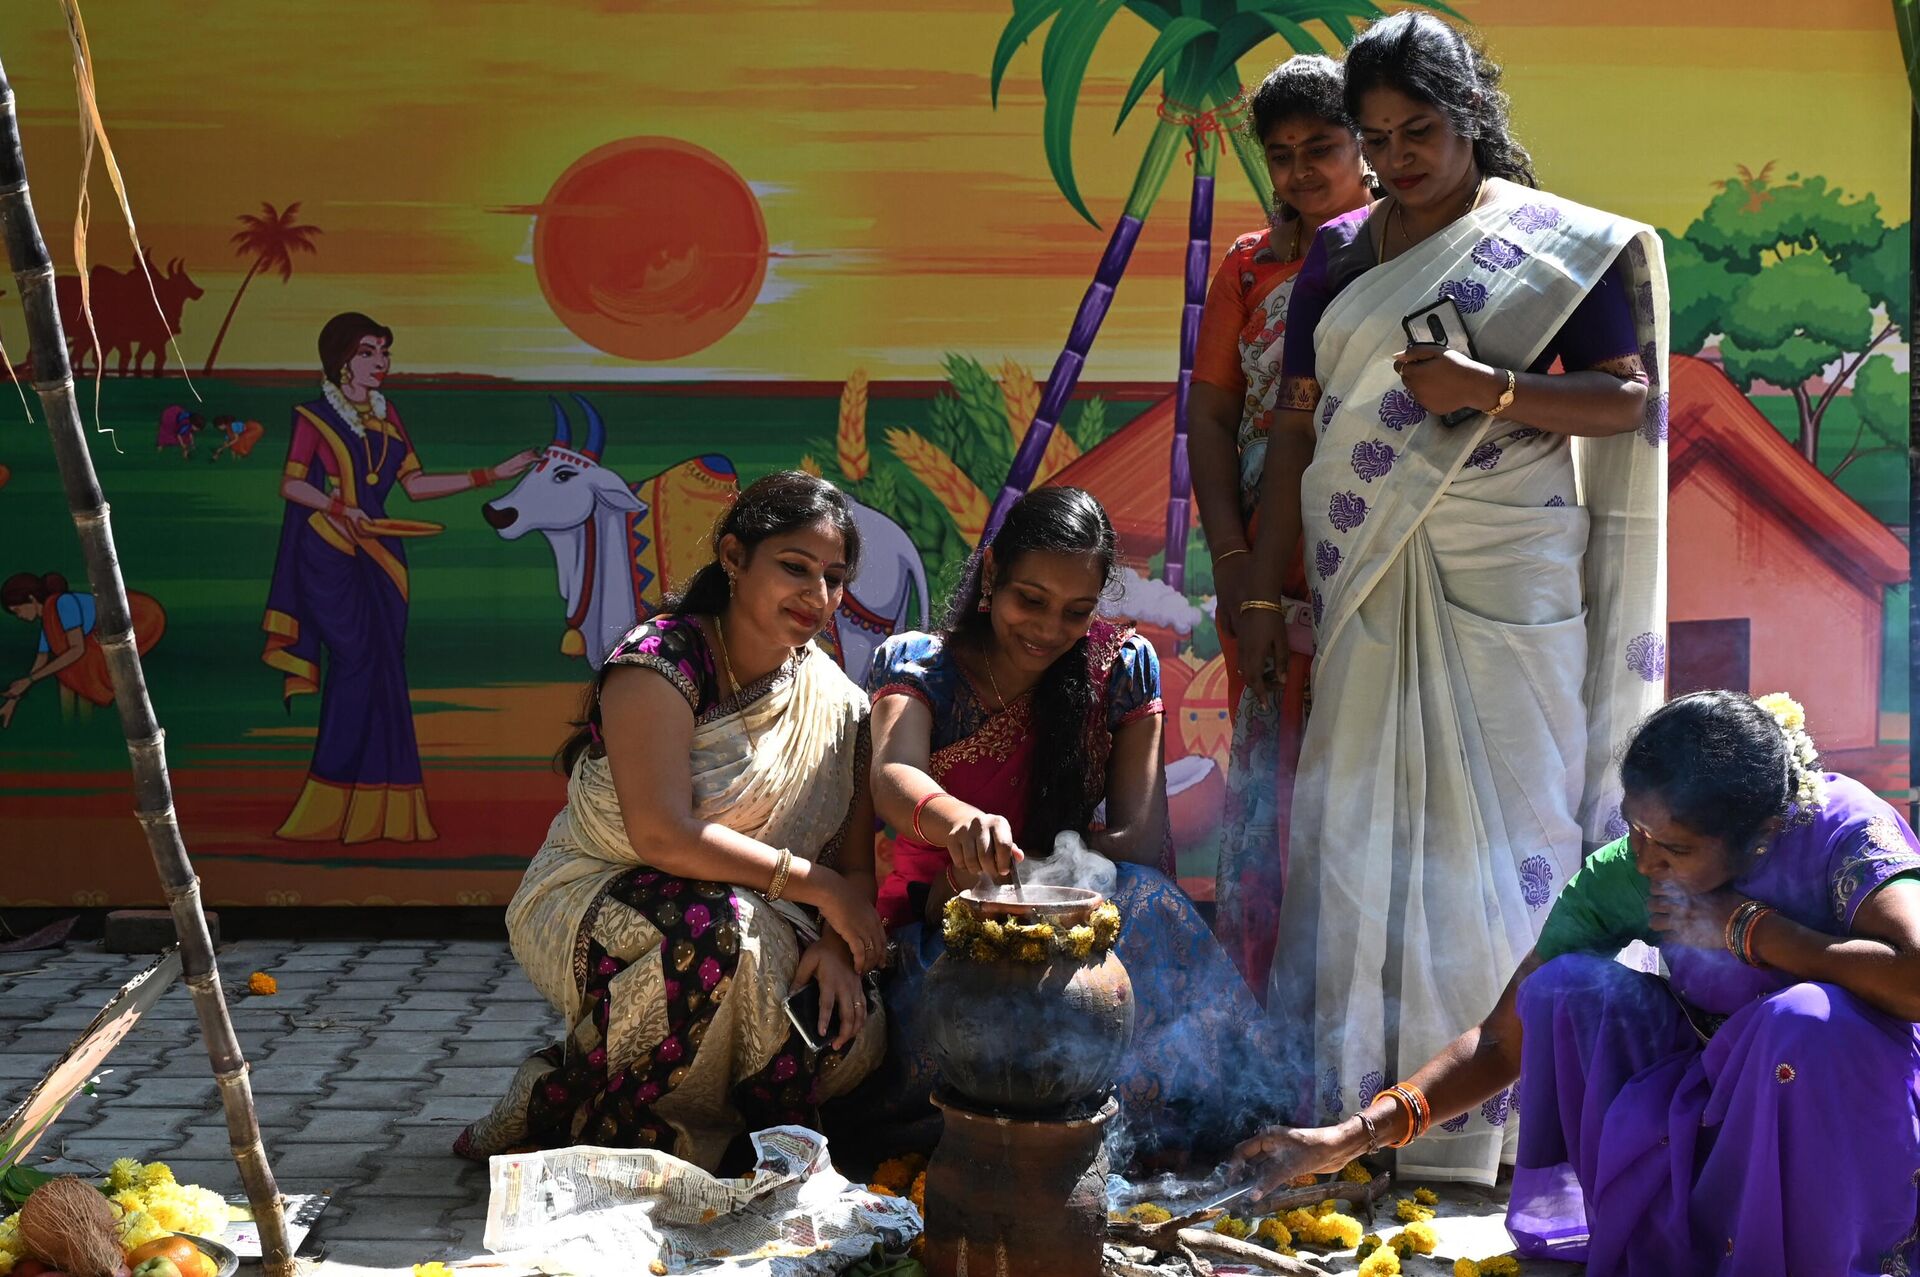 Students prepare sweet pongal during celebrations for 'Pongal', the Tamil harvest festival, at a college in Chennai on January 12, 2023. (Photo by Arun SANKAR / AFP) - Sputnik India, 1920, 14.01.2023